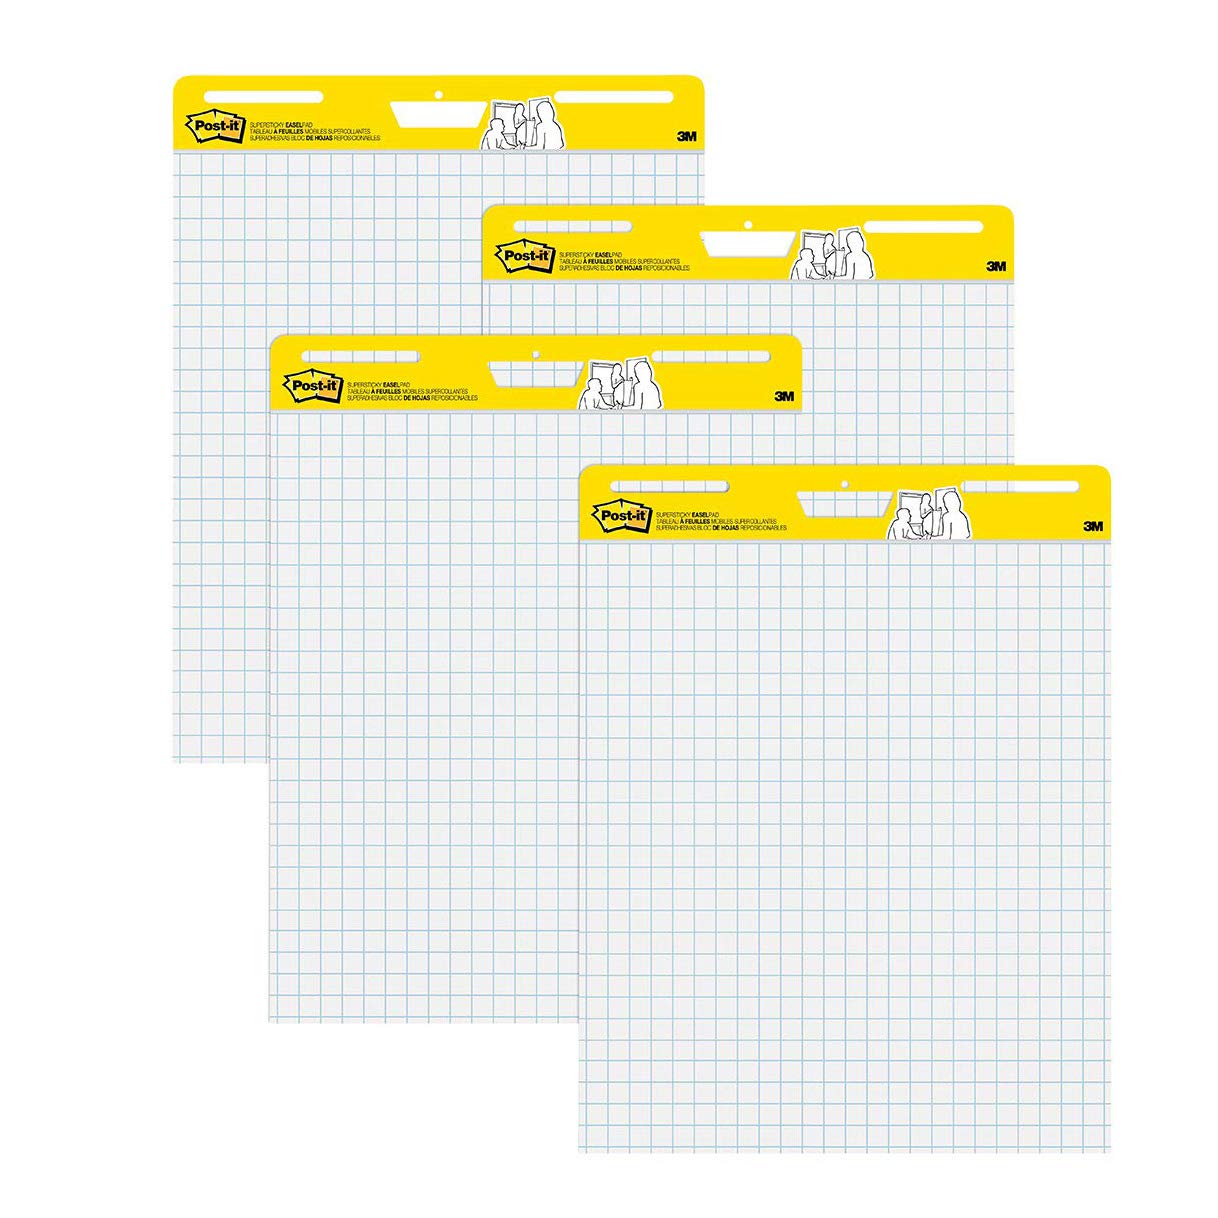 Post-it Super Sticky Easel Pad, Great for Virtual Teachers and Students, 25 x30 Inches, White with Grid, 30 Sheets/Pad, 4 Pads/Pack (560 VAD 4PK)